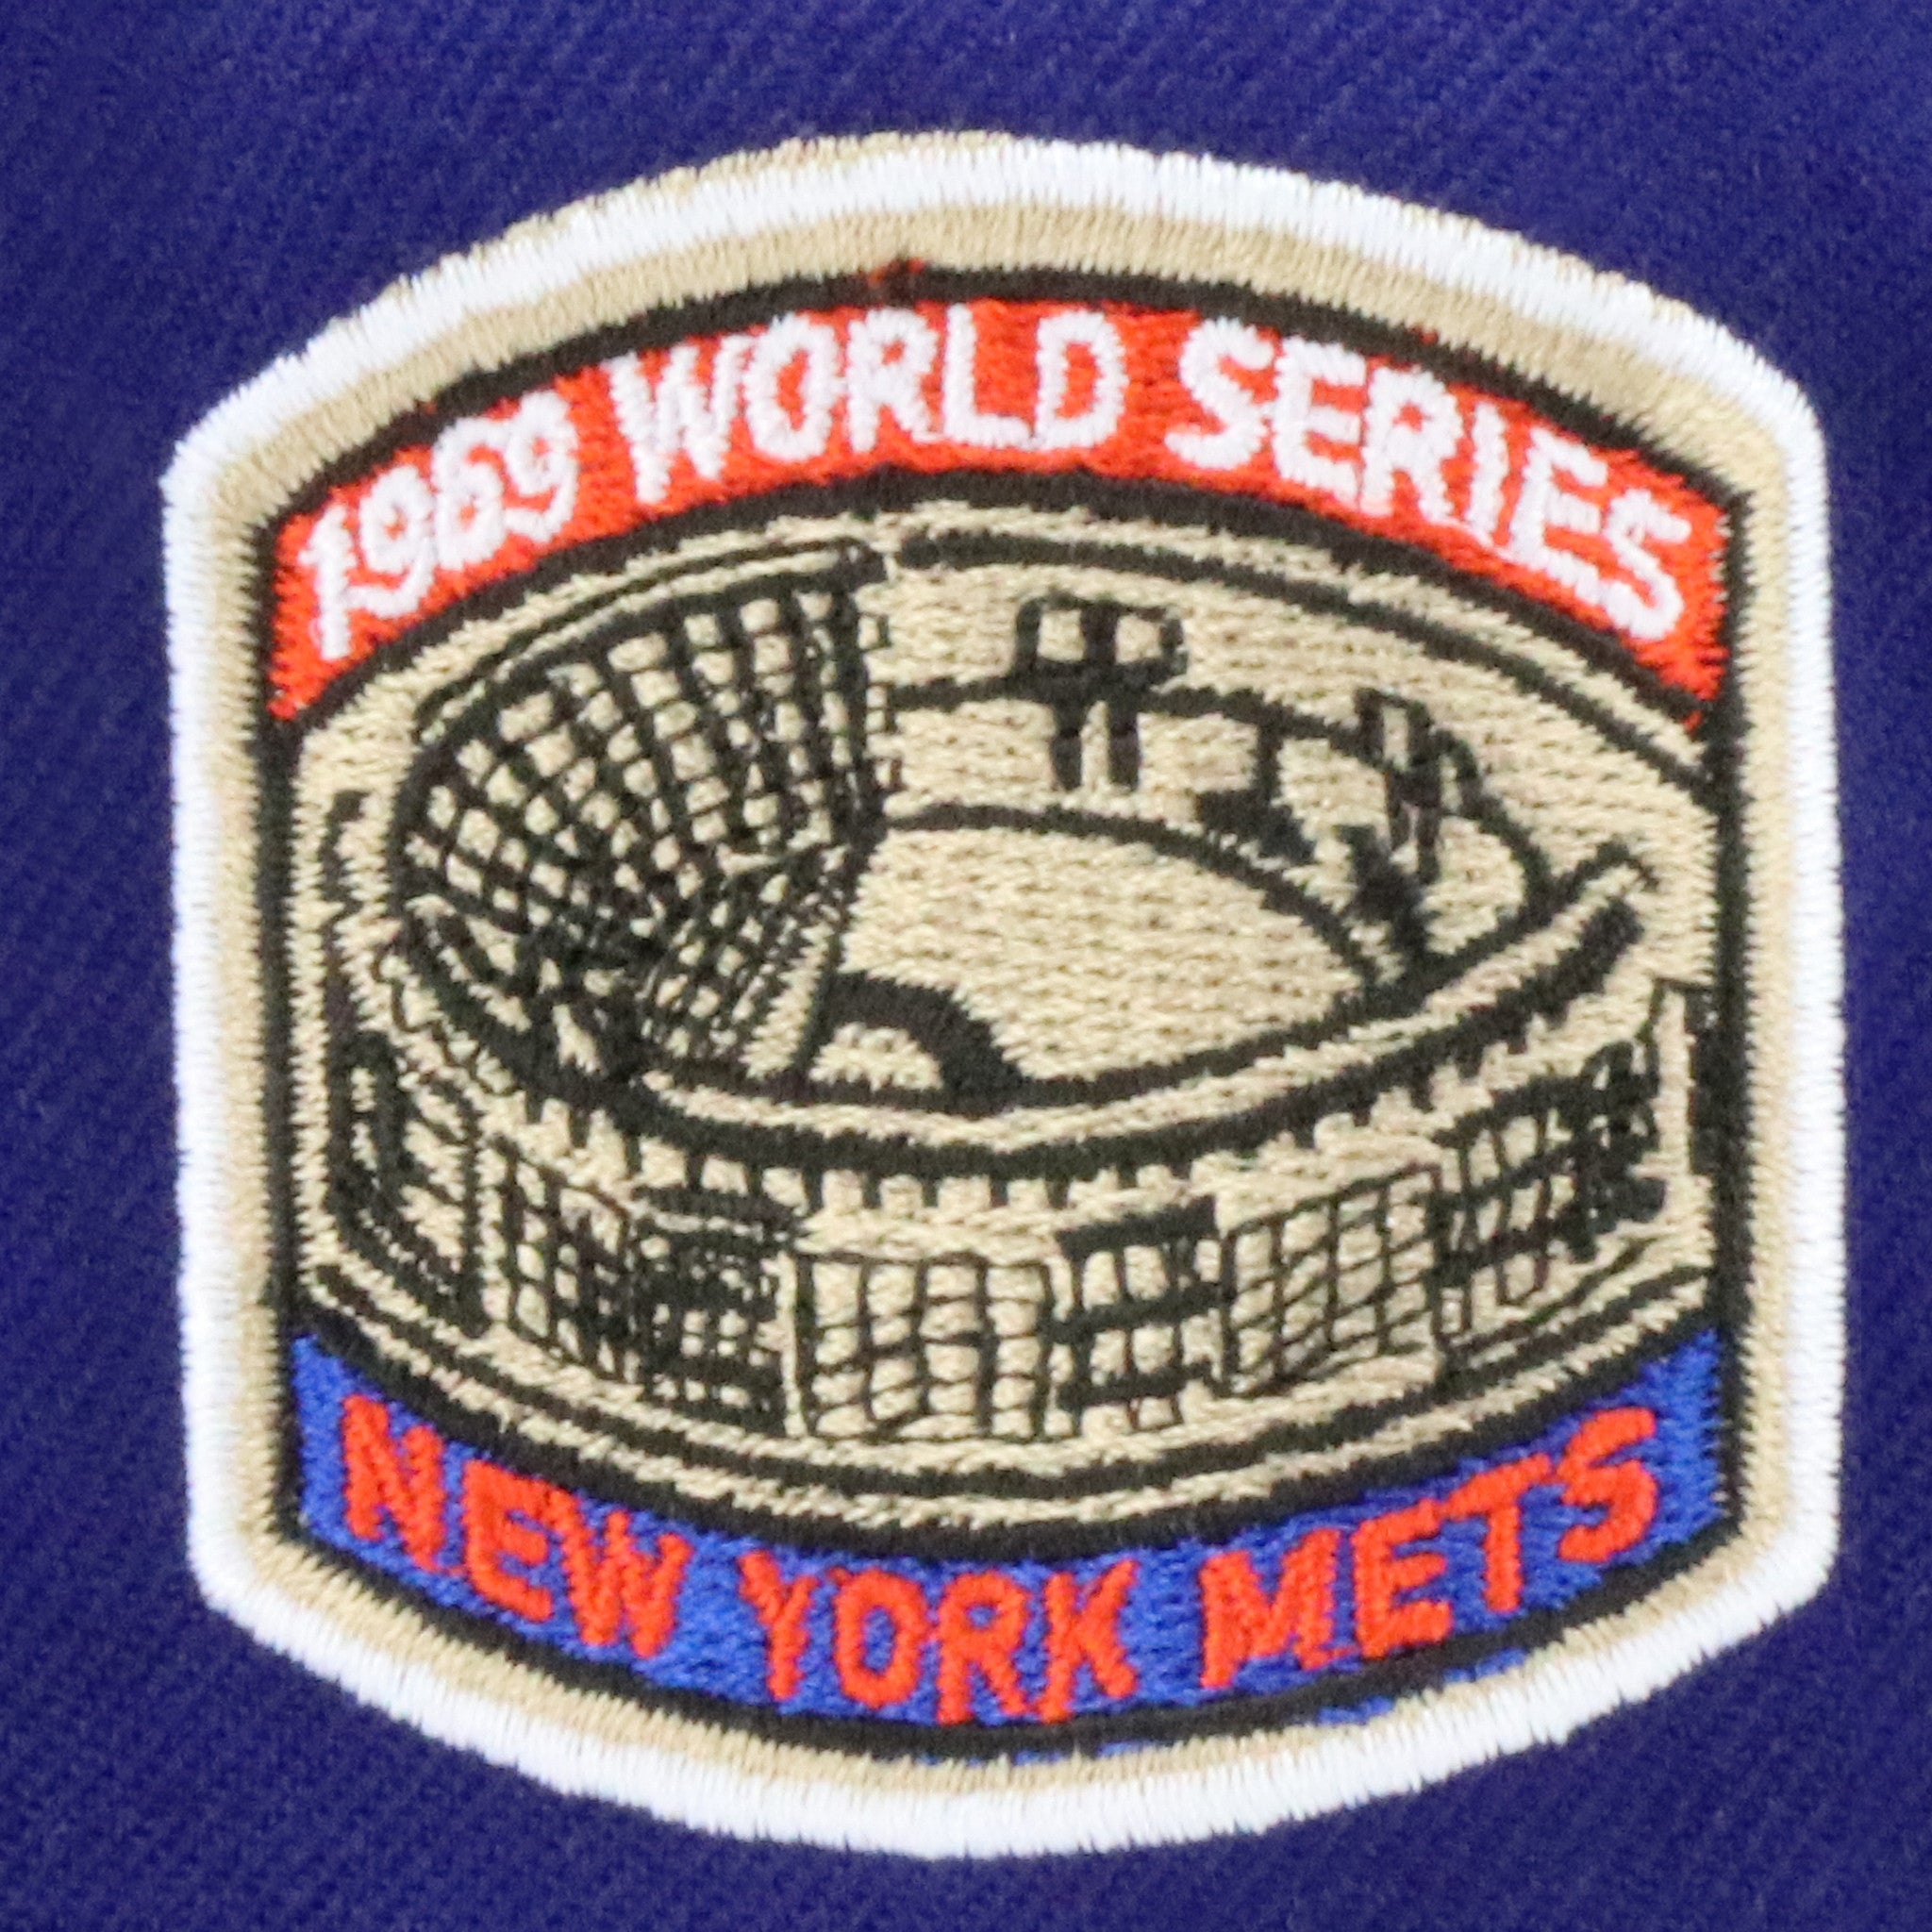 NEW YORK METS NEW ERA 59FIFTY 1969 WORLD SERIES FITTED PATCH